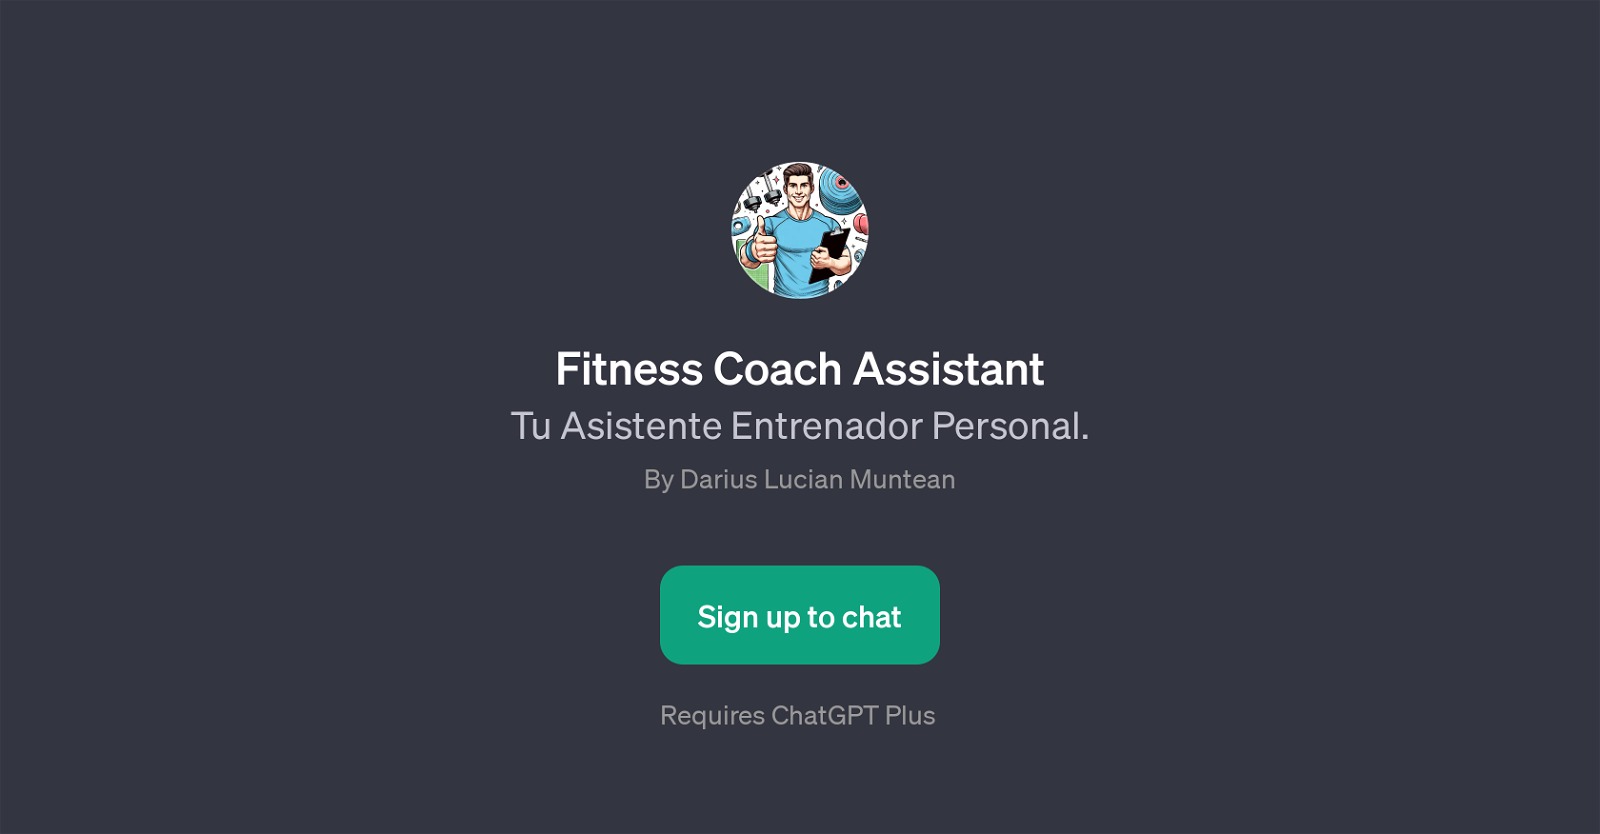 Fitness Coach Assistant website